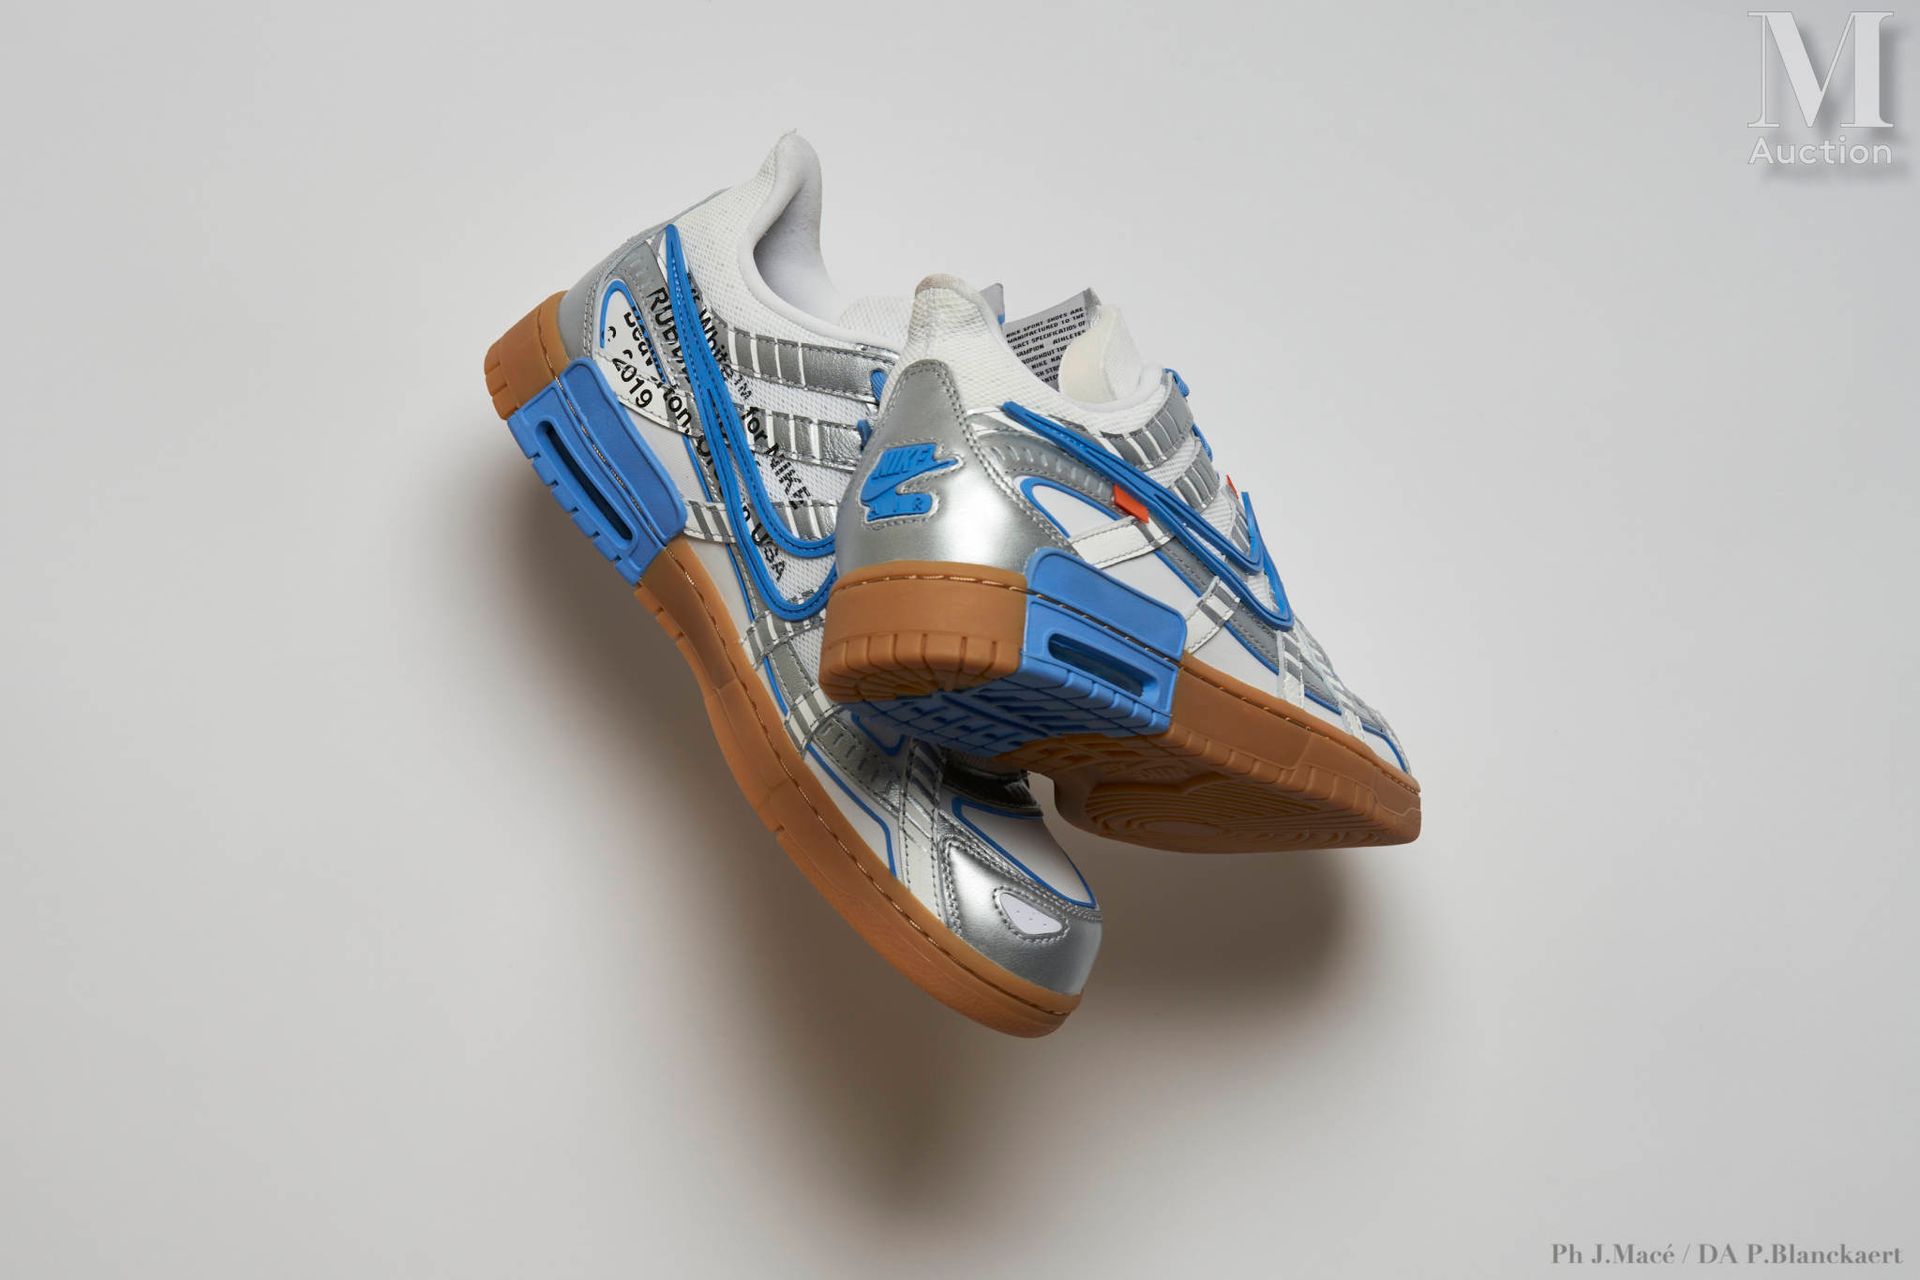 NIKE X OFF WHITE PAIR OF "DUNK LOW RUBBER DUNK" SNEAKERS
in blue, white and oran&hellip;